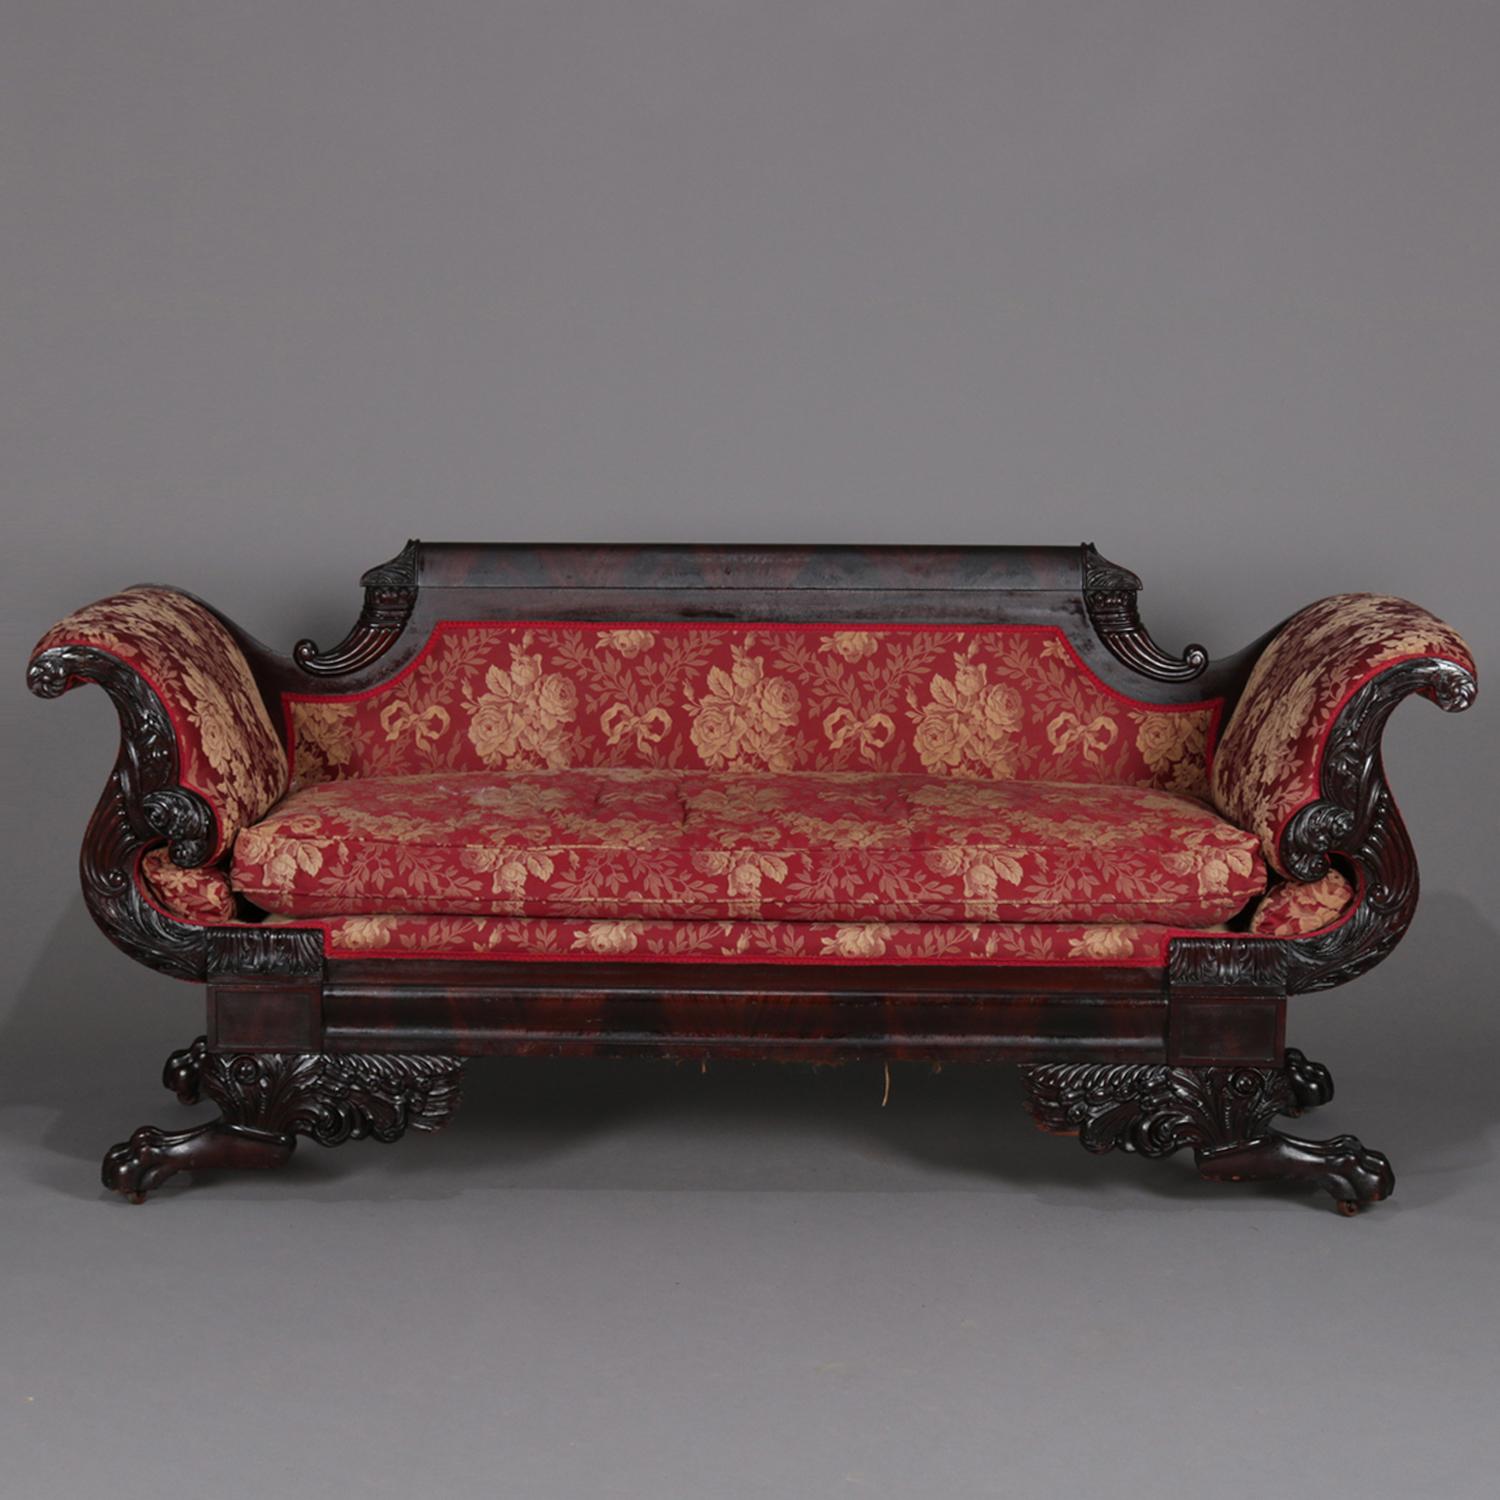 Antique First Period American Empire classical pair matching sofas feature carved mahogany frame with back rail flanked by concave and carved cornucopia over scrolled arms with carved overflowing cornucopias with rosettes in the scroll and acanthus